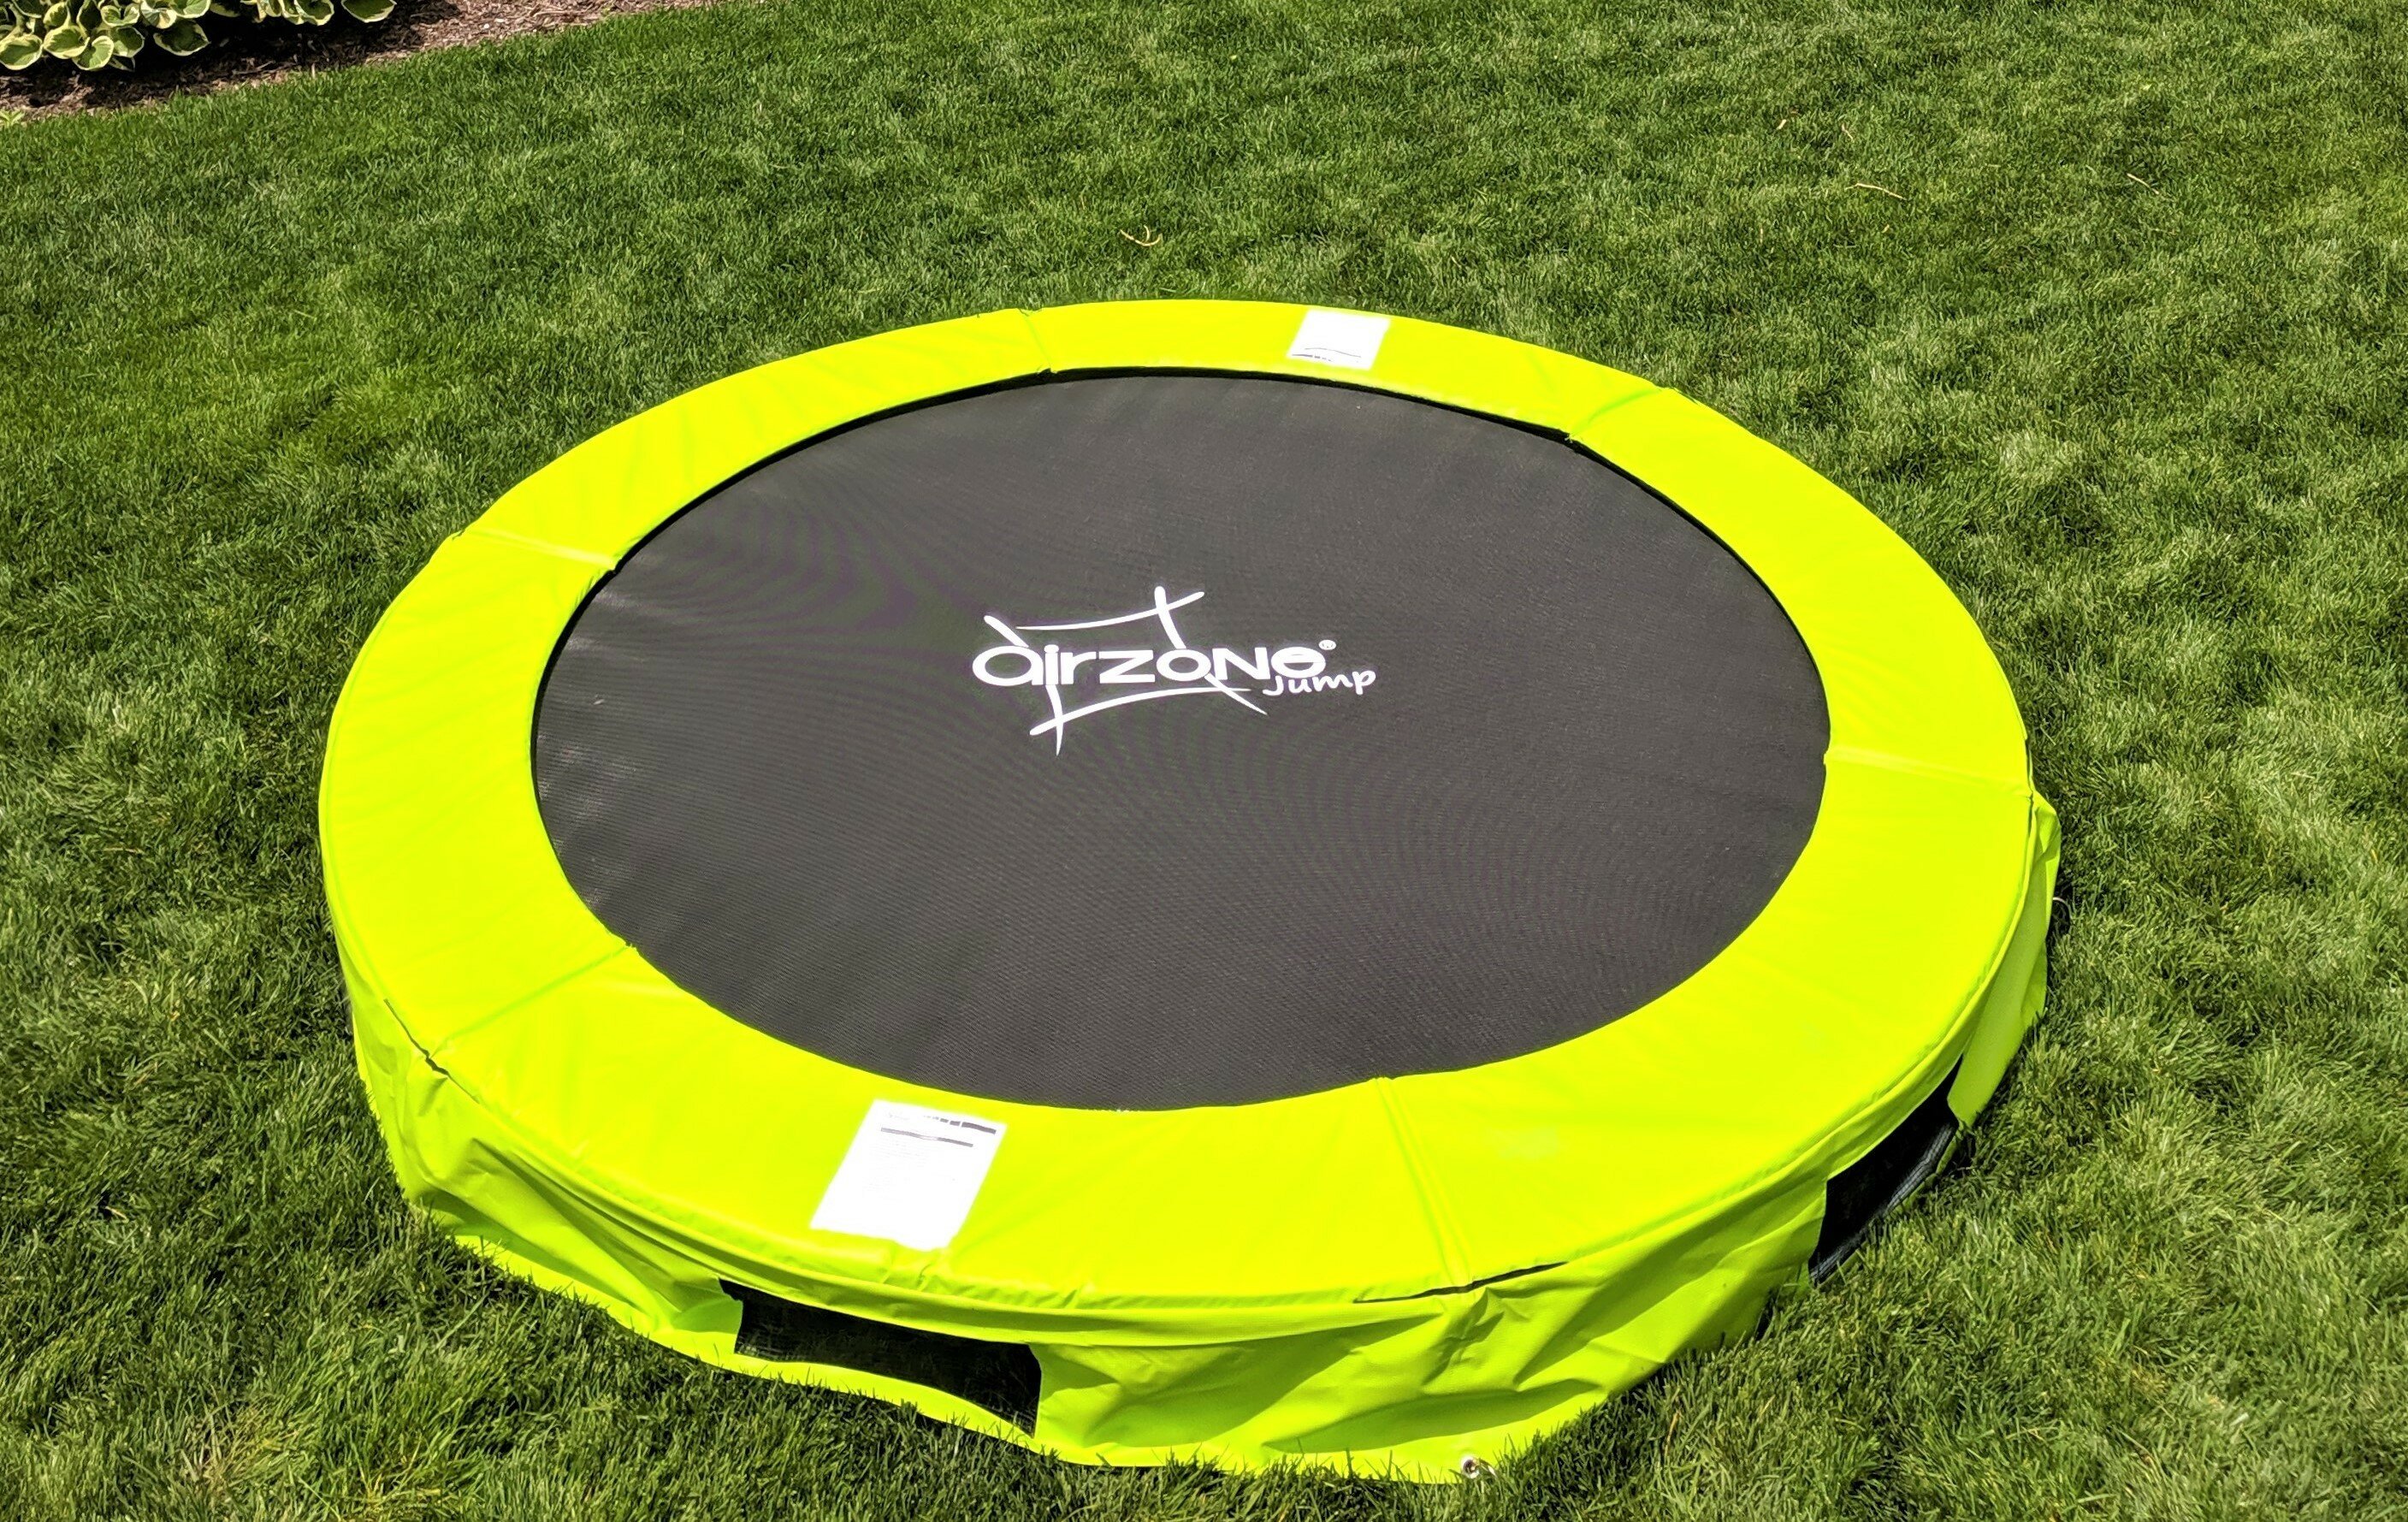 Airzone Play Jump In Ground 8 Round Trampoline Reviews